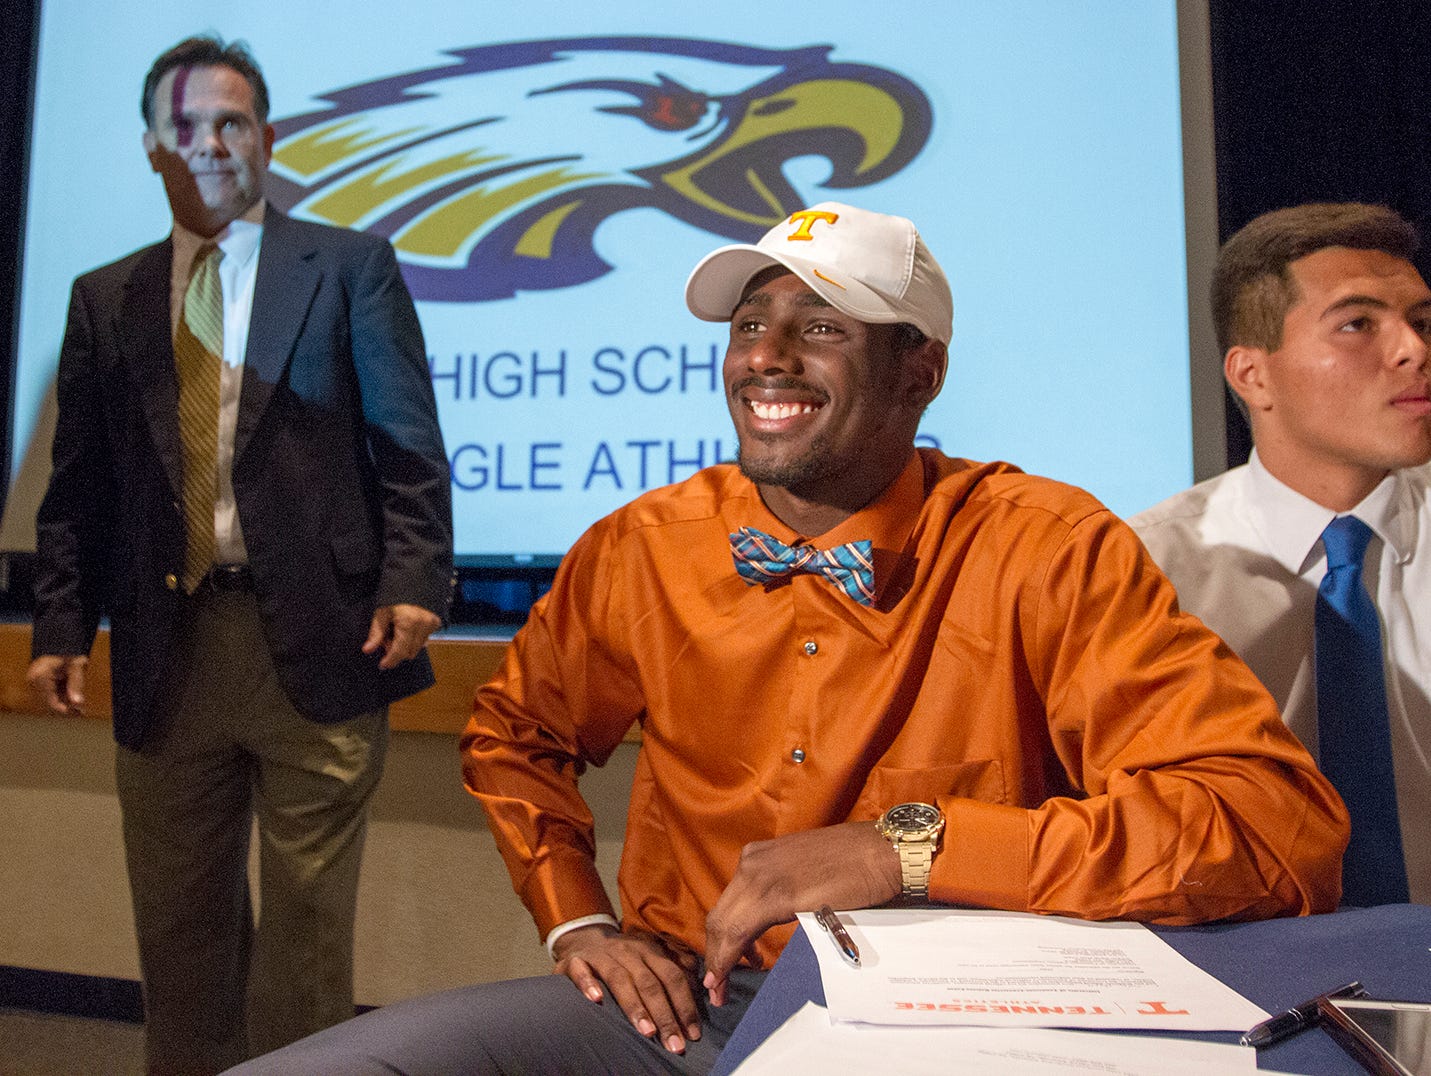 Naples High School’s Tyler Byrd was among the school’s athletes who signed National Letters of Intent Wednesday at the school. Byrd will play football at the University of Tennessee.